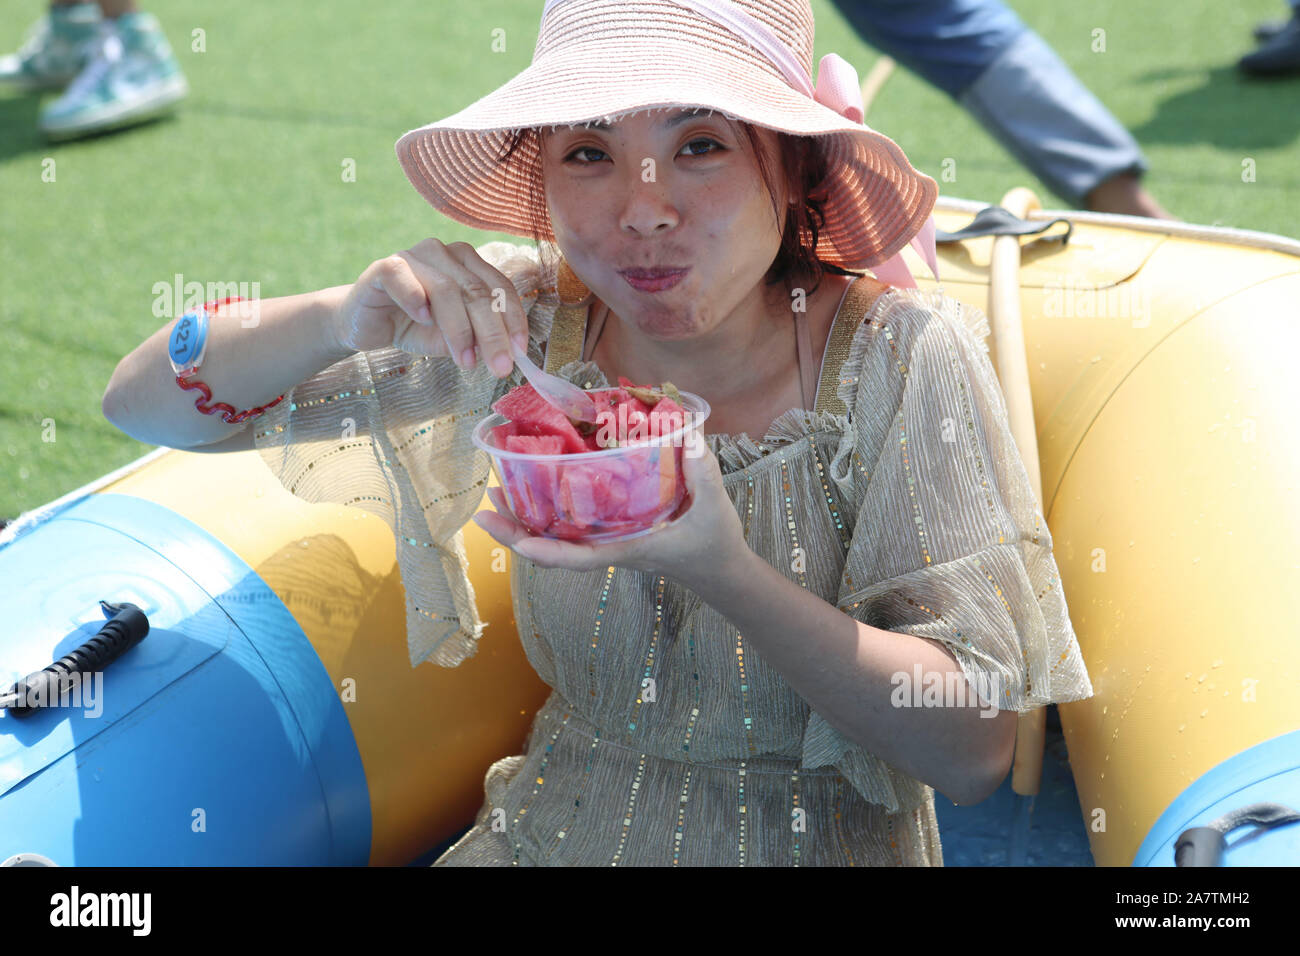 A tourist enjoys watermelon added with zhacai, or pickled mustard stems, at a water park in Fuling district, Chongqing, China, 17 August 2019. A Chine Stock Photo